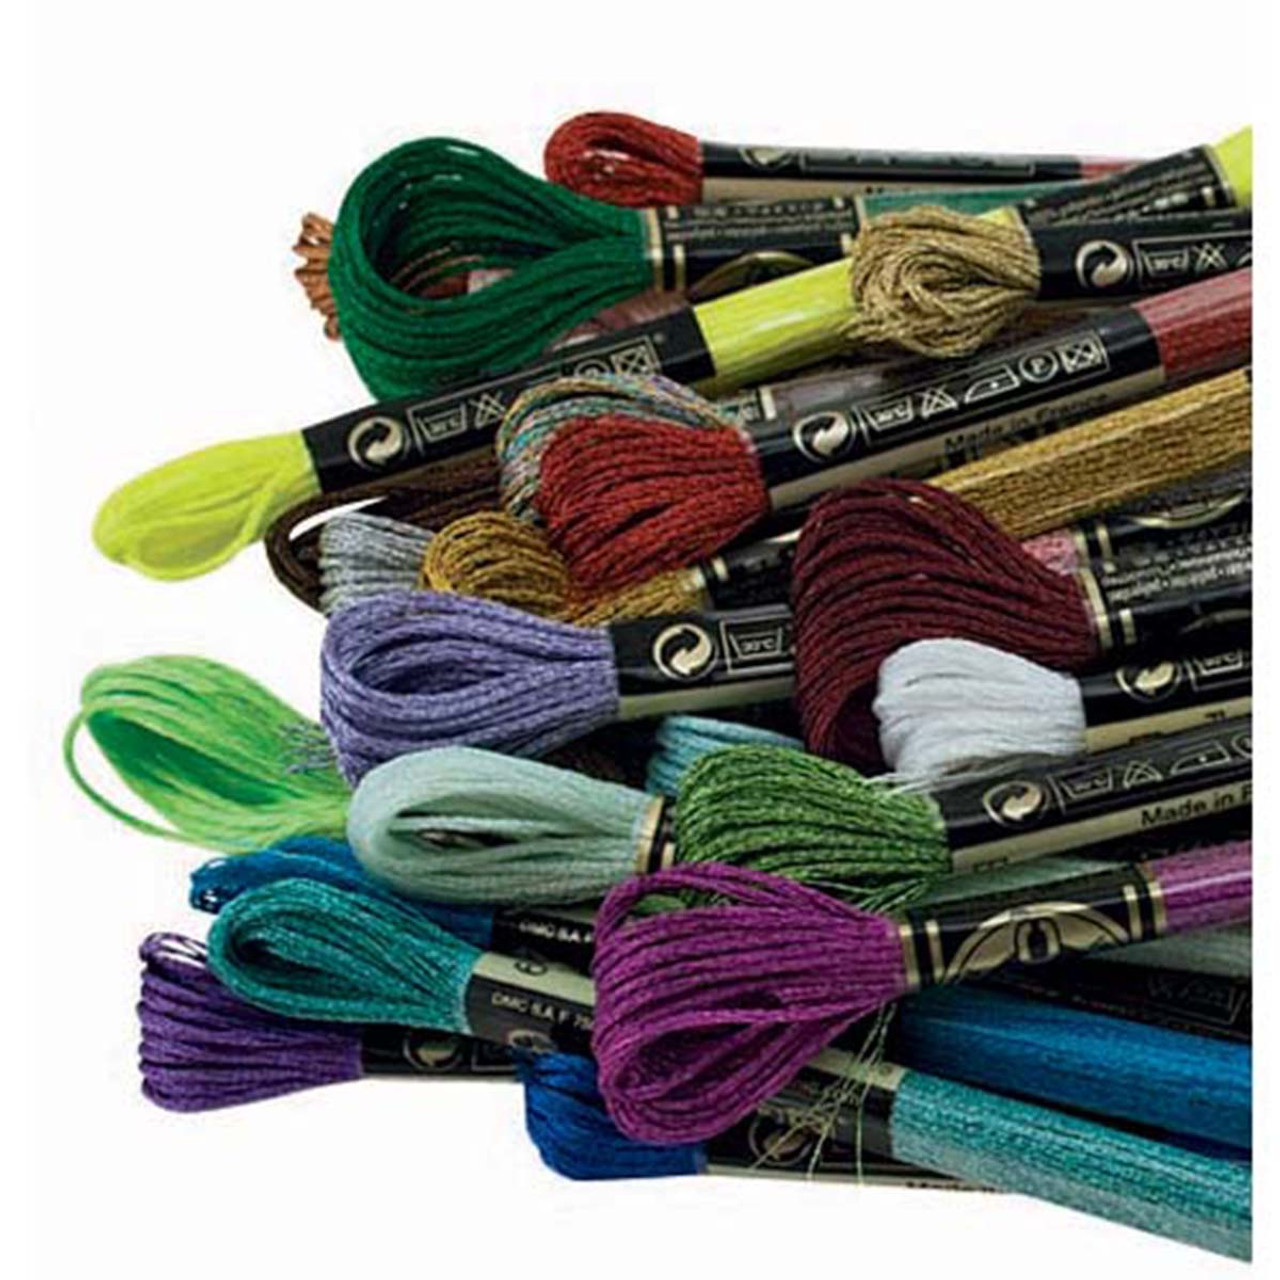 Hot 19Pcs Metallic Embroidery Skein Threads Multi-Color Embroidery